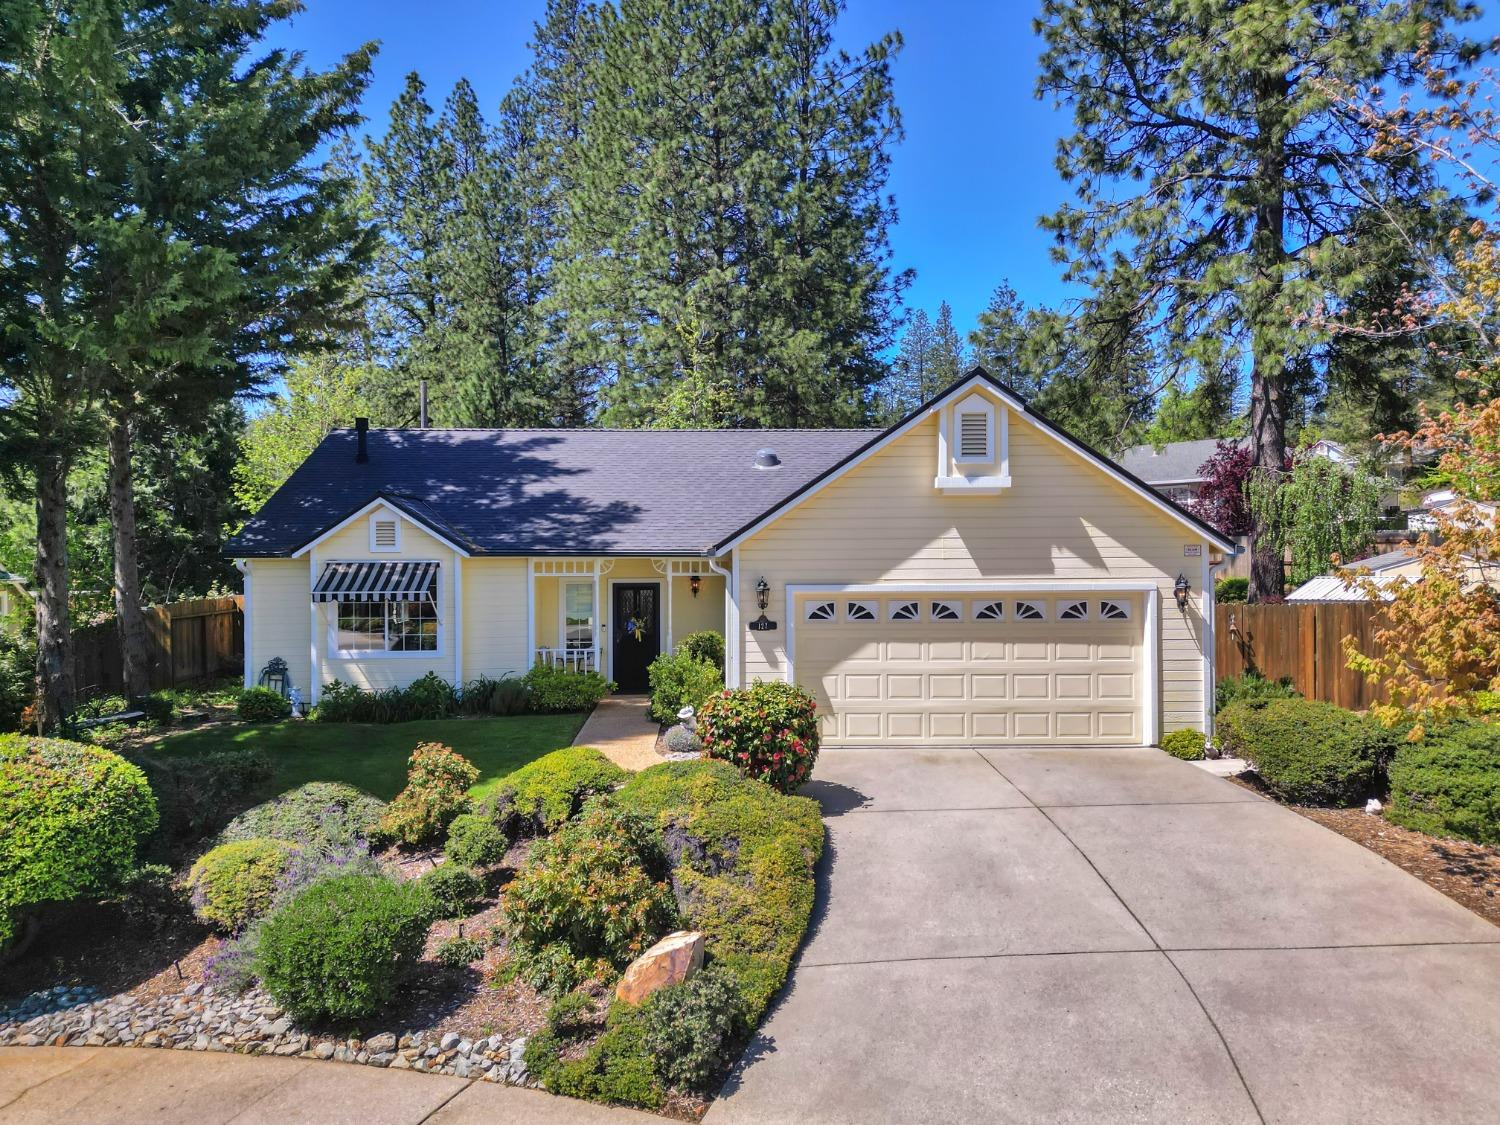 Photo of 127 Peabody Ct in Grass Valley, CA